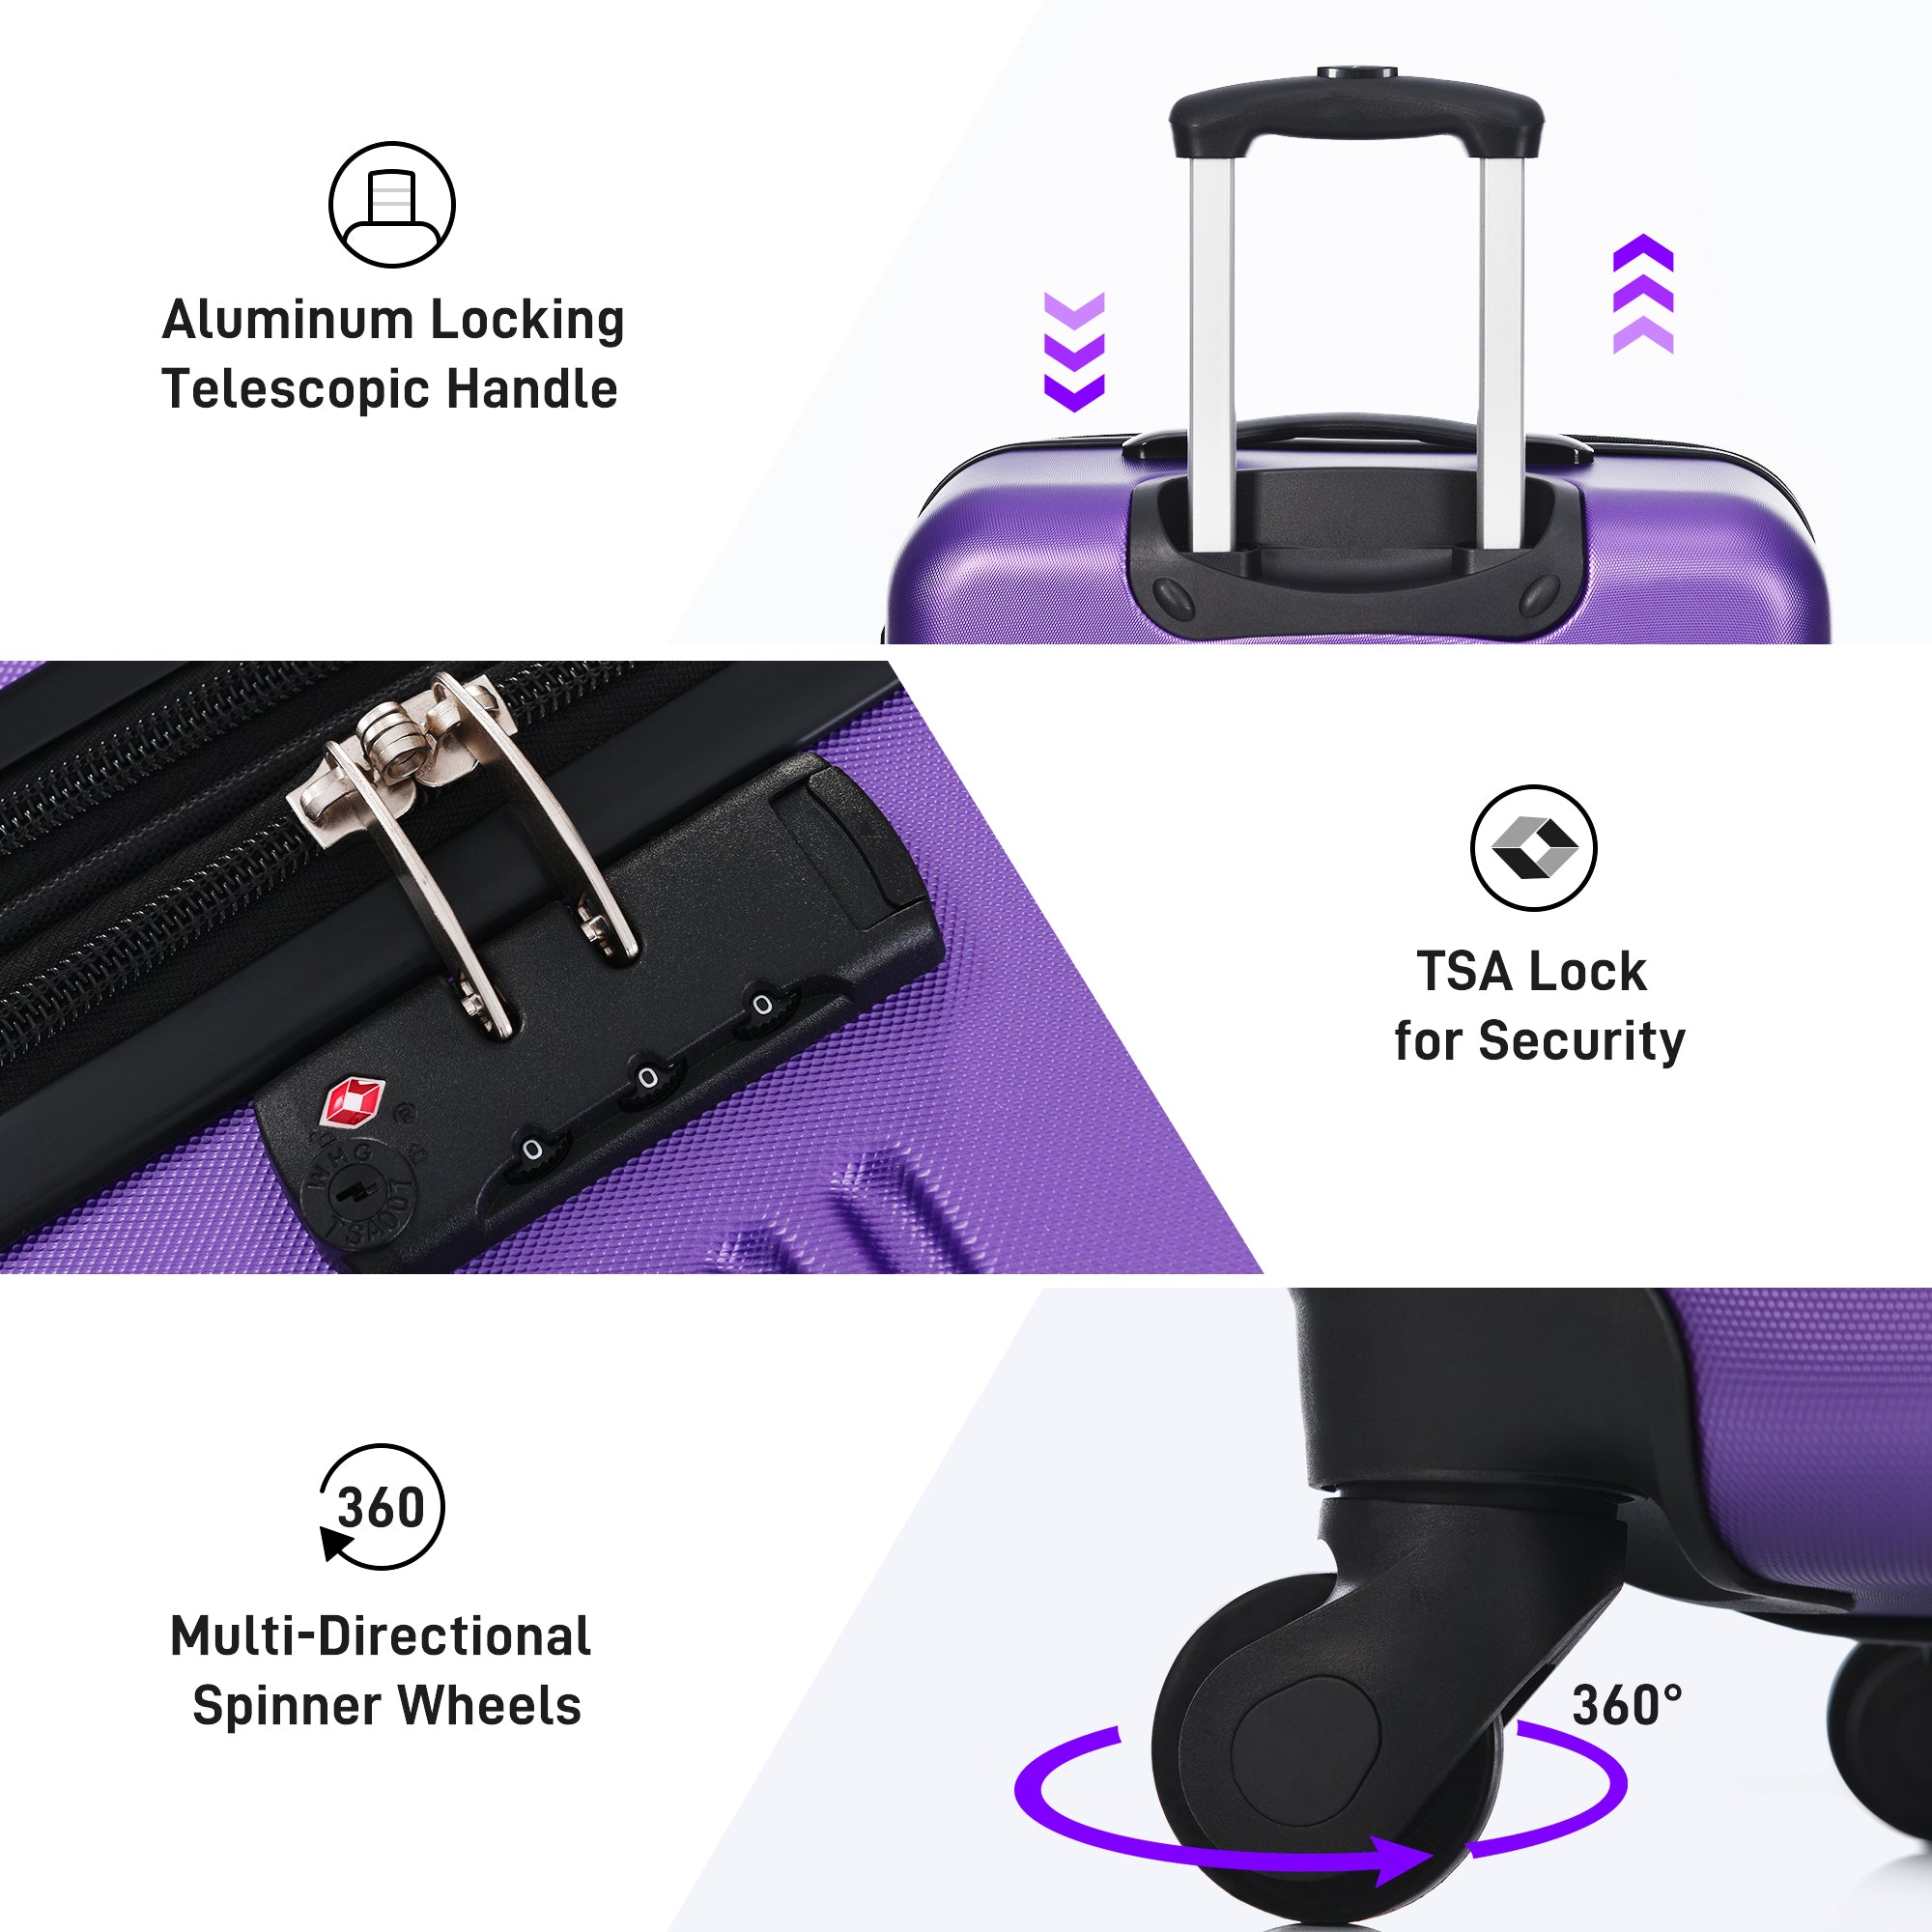 Luggage Sets of 2 Piece Carry on Suitcase Airline purple-abs